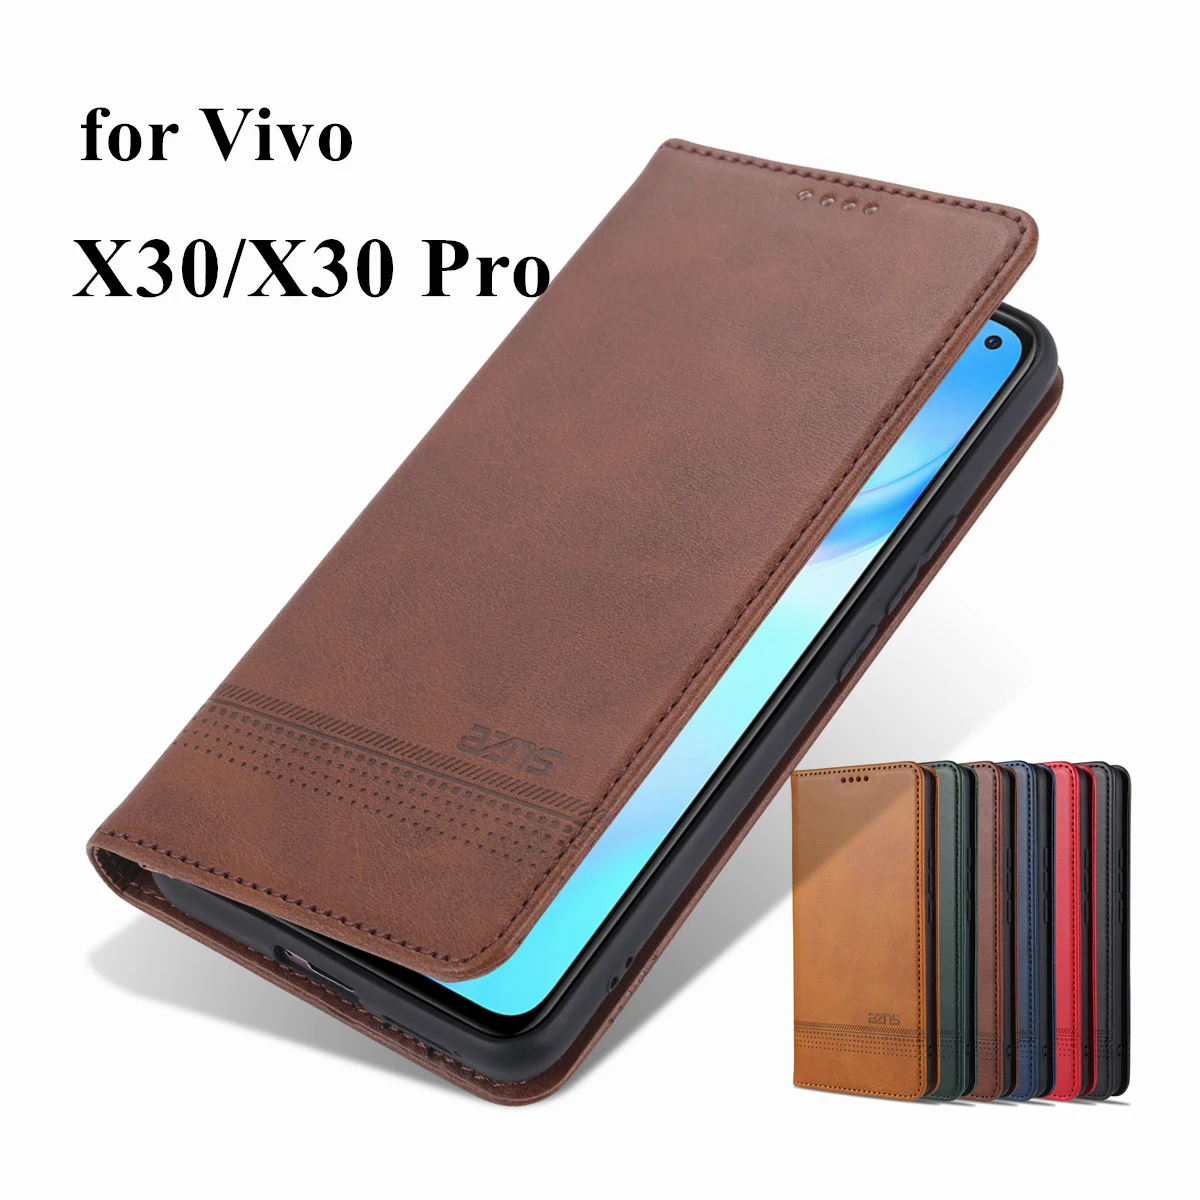 

Deluxe Magnetic adsorption leather case for Vivo X30 / Vivo X30 Pro Flip Cover wallet Protective Case capa fundas